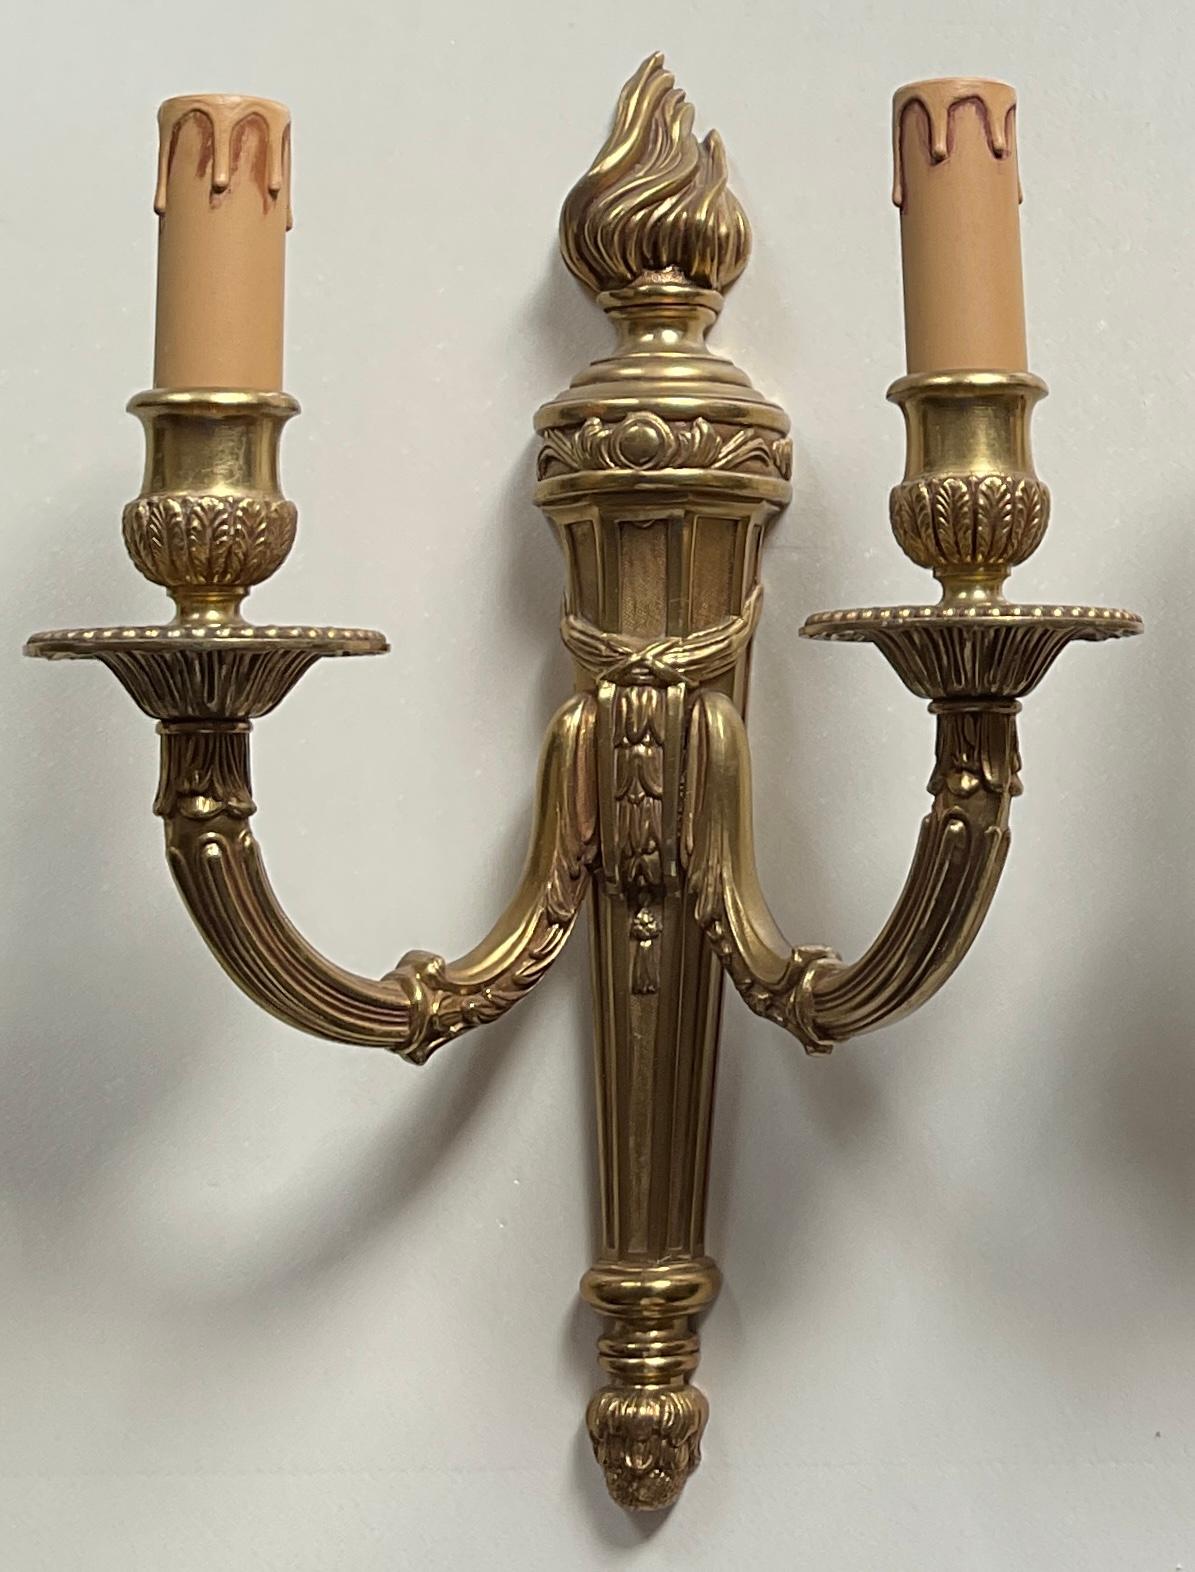 A Fine pair of French Louis XV style gilt bronze wall sconces. 

Beautiful designed and in very good condition.
Electrified.

Dimensions: 13 5/8